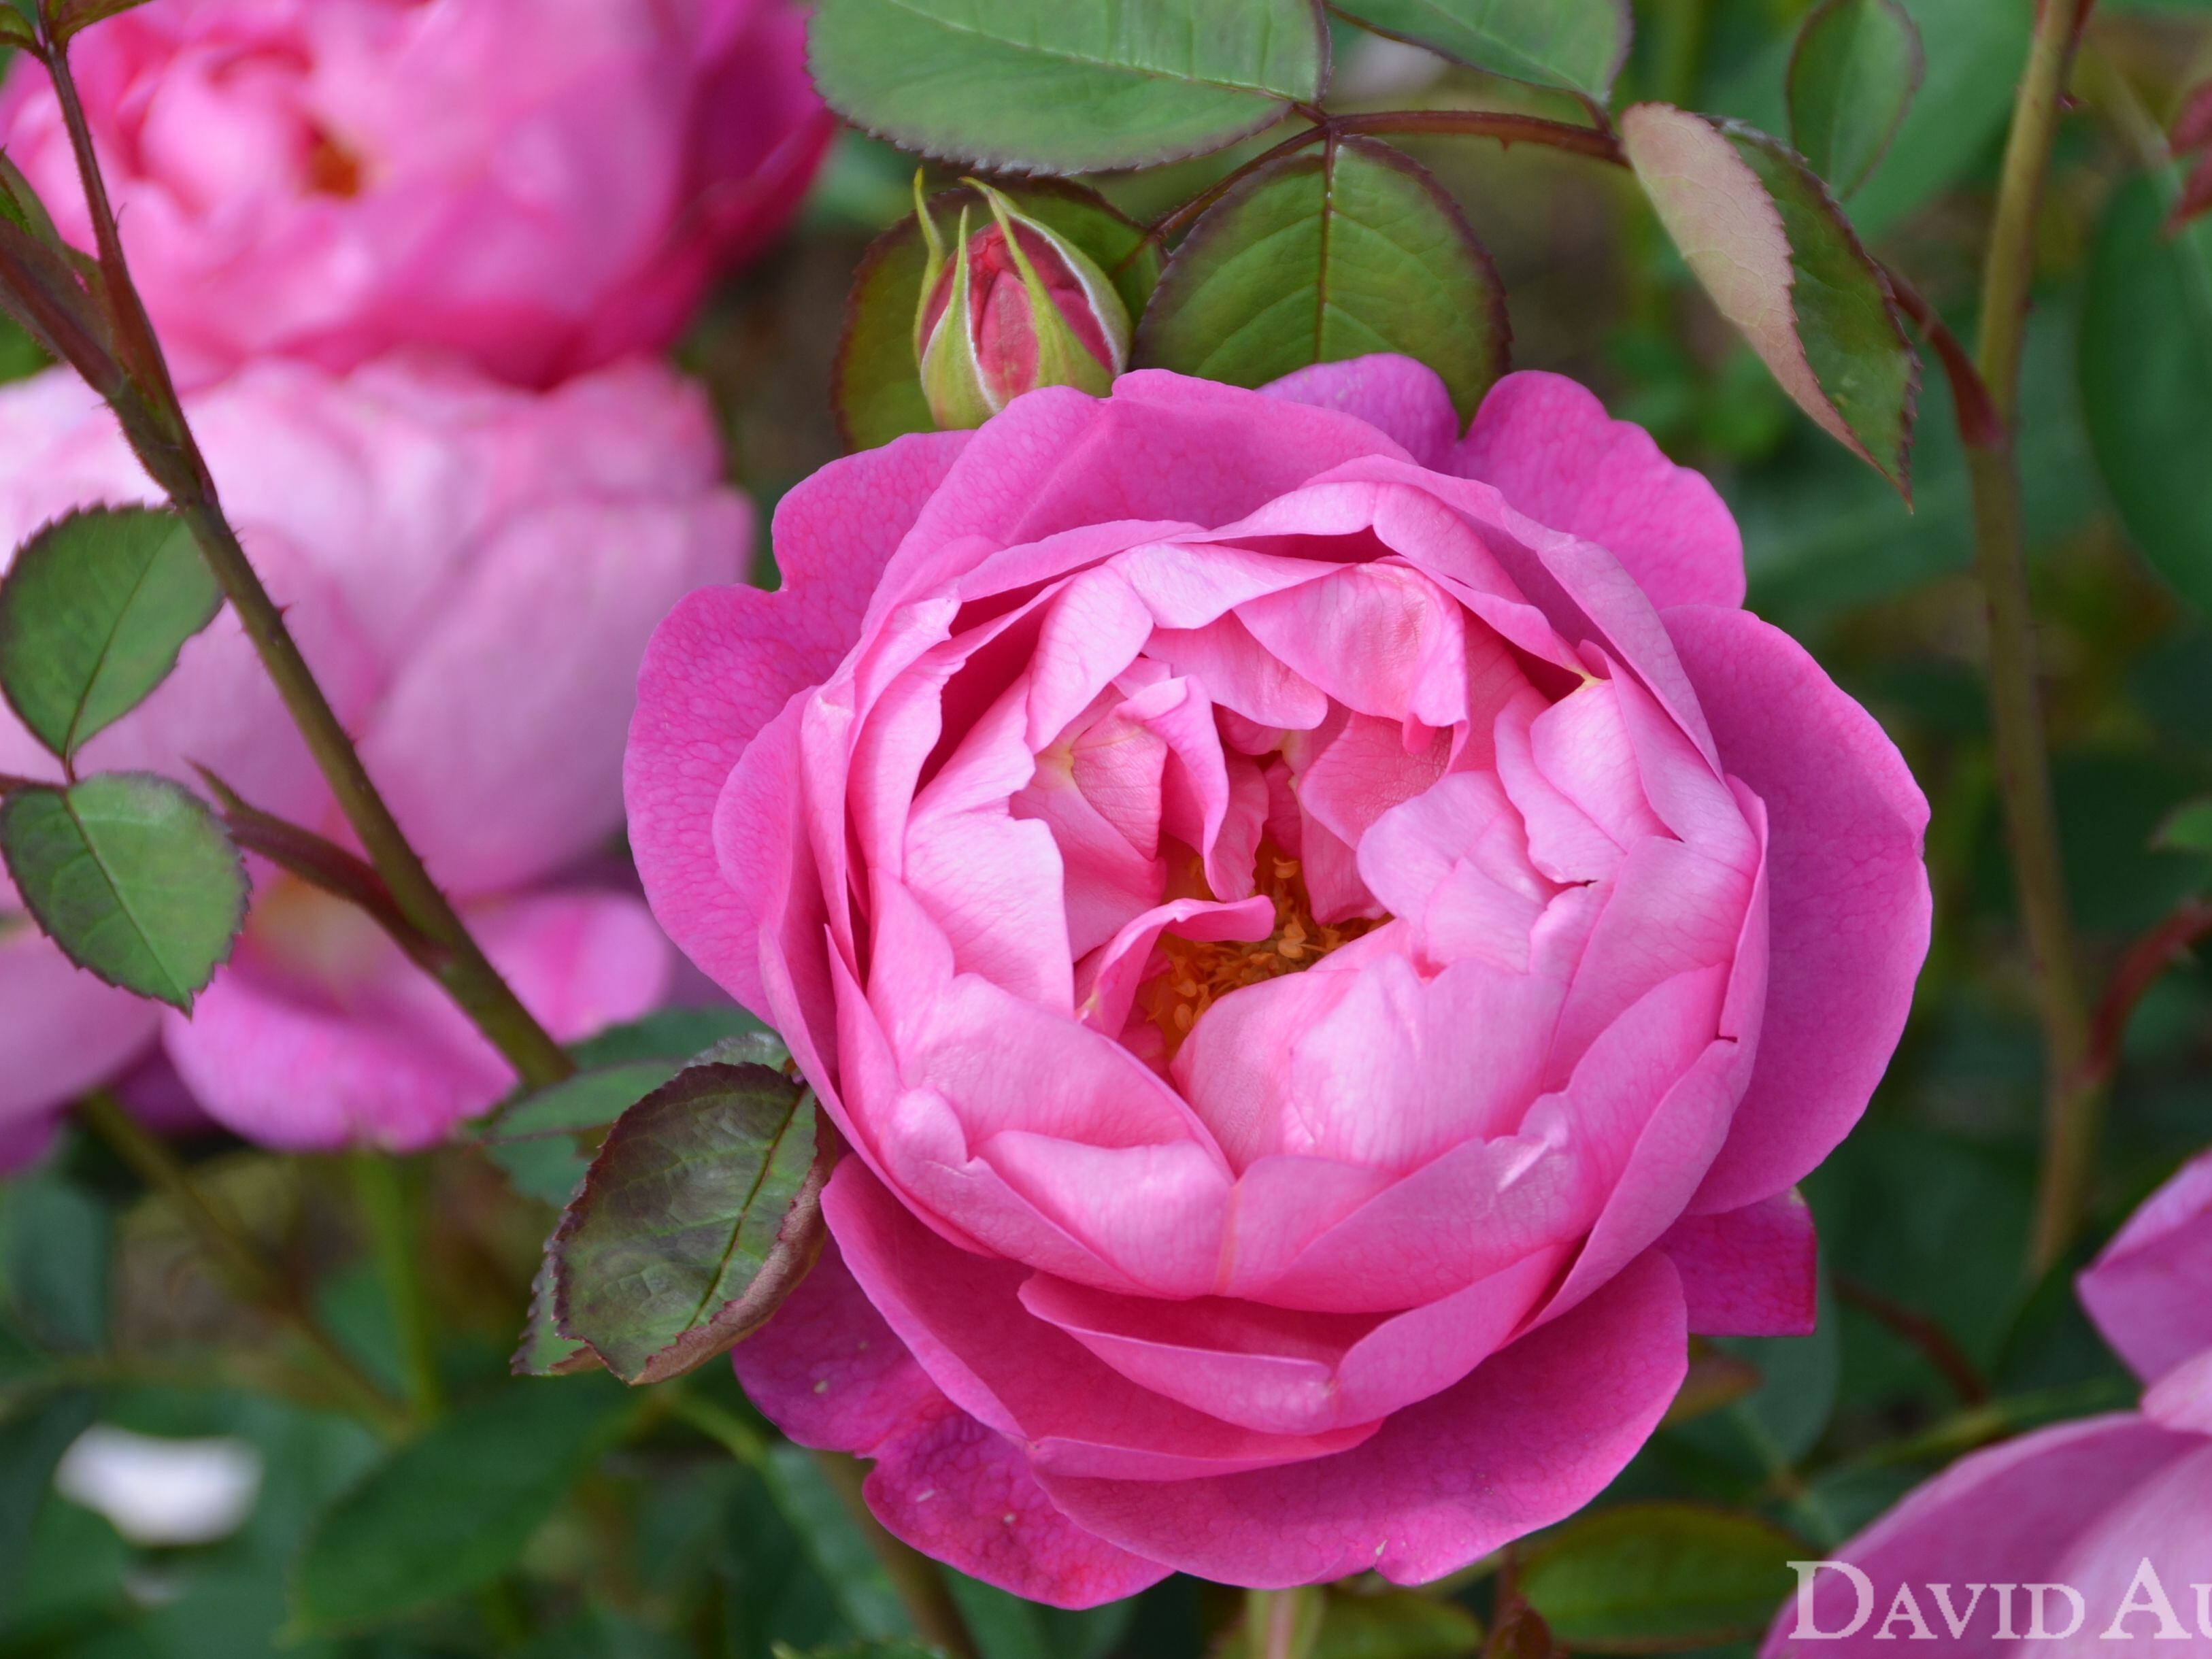 David Austin Roses releases regal collection of blooms available for coronation